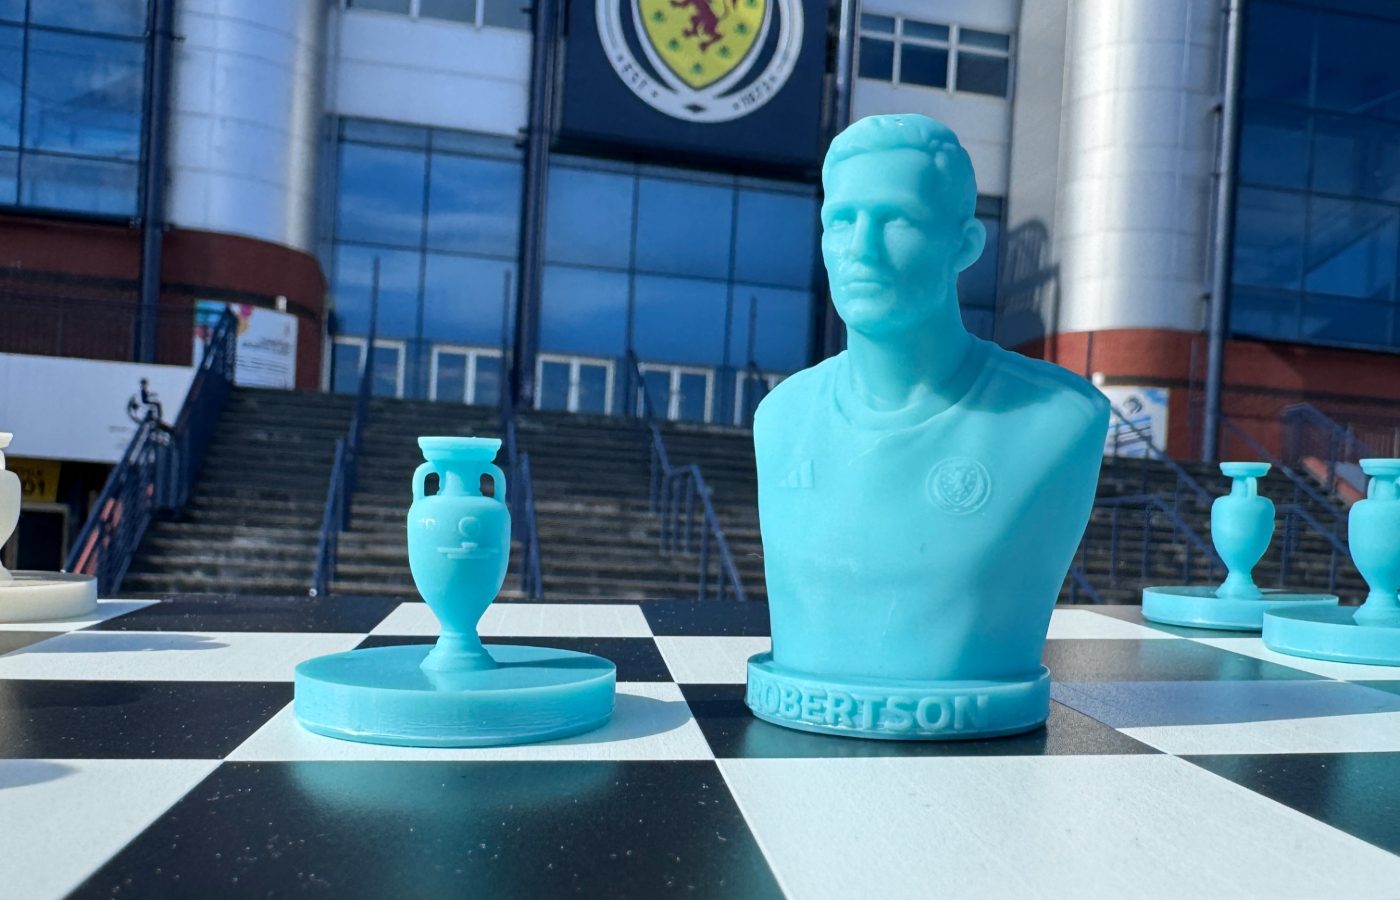 Scotland captain Andy Robertson in the 3D chess set.